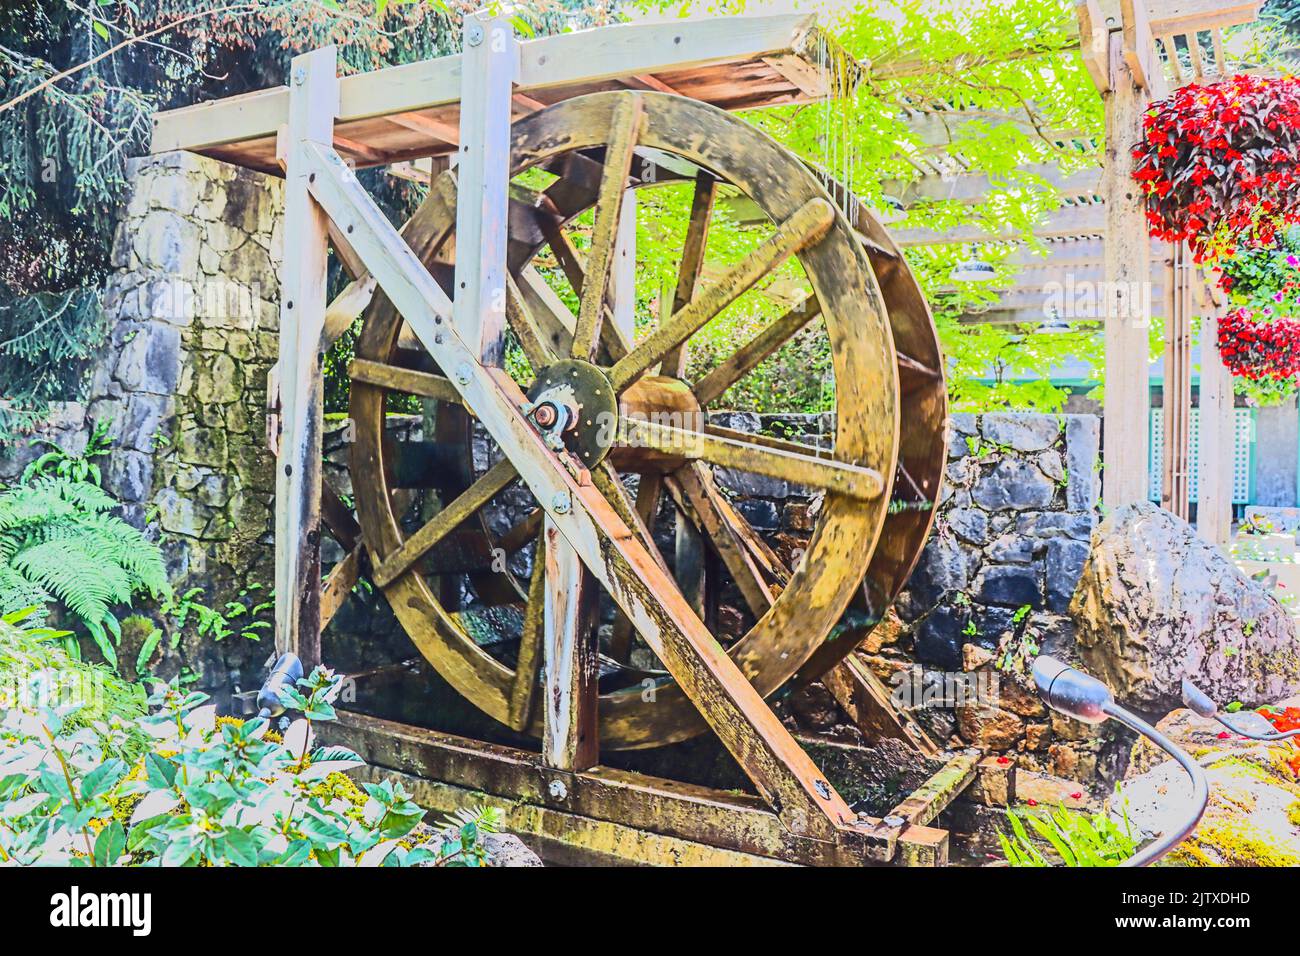 Water Wheel at Butchart Gardens located in Brentwood Bay, British Columbia, Canada. Stock Photo